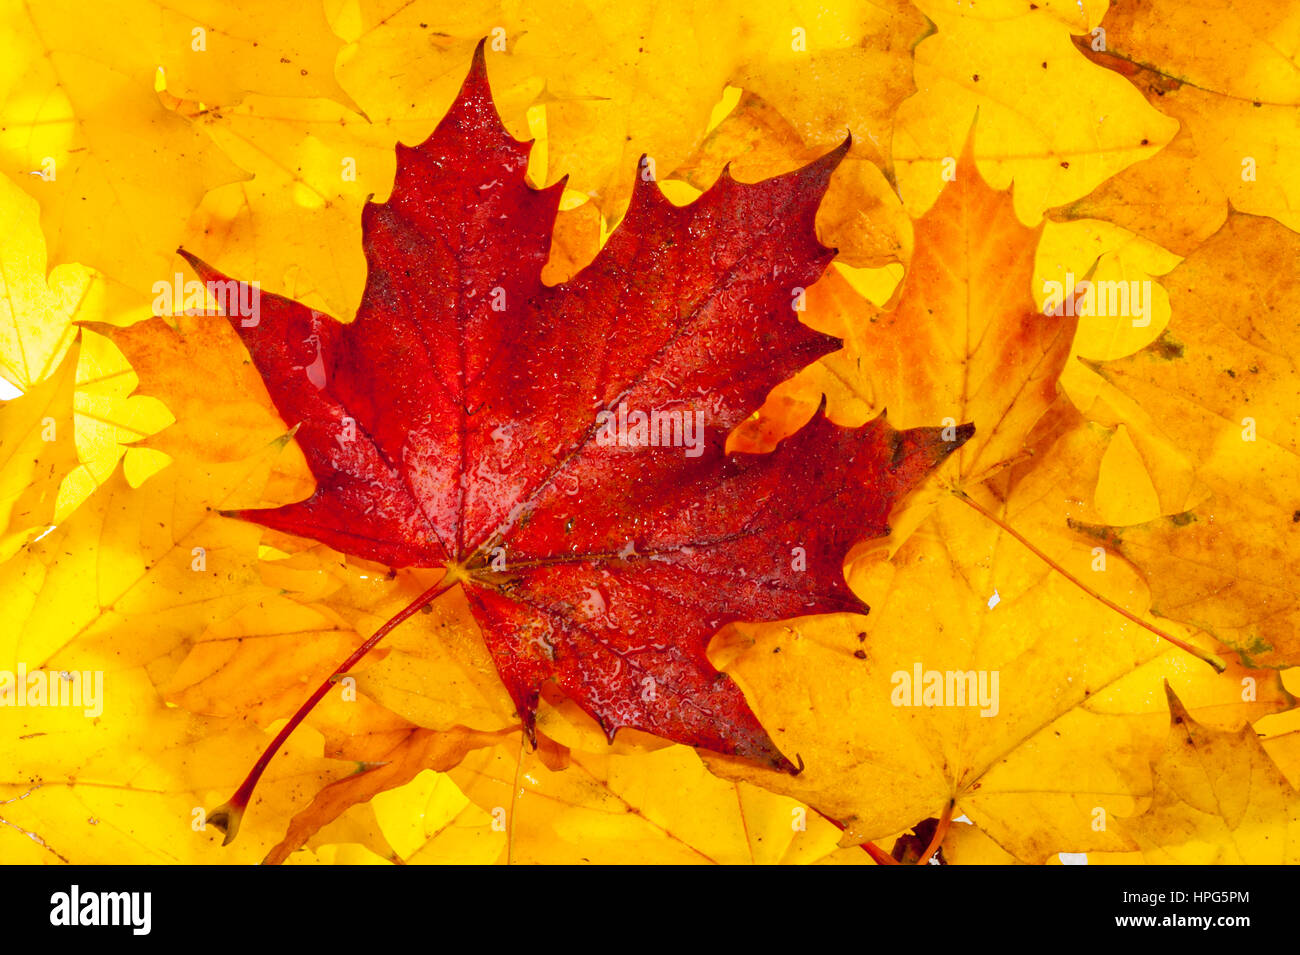 Red orange and yellow maple leaves photographed in a studio to bring out the autumn colours. Stock Photo